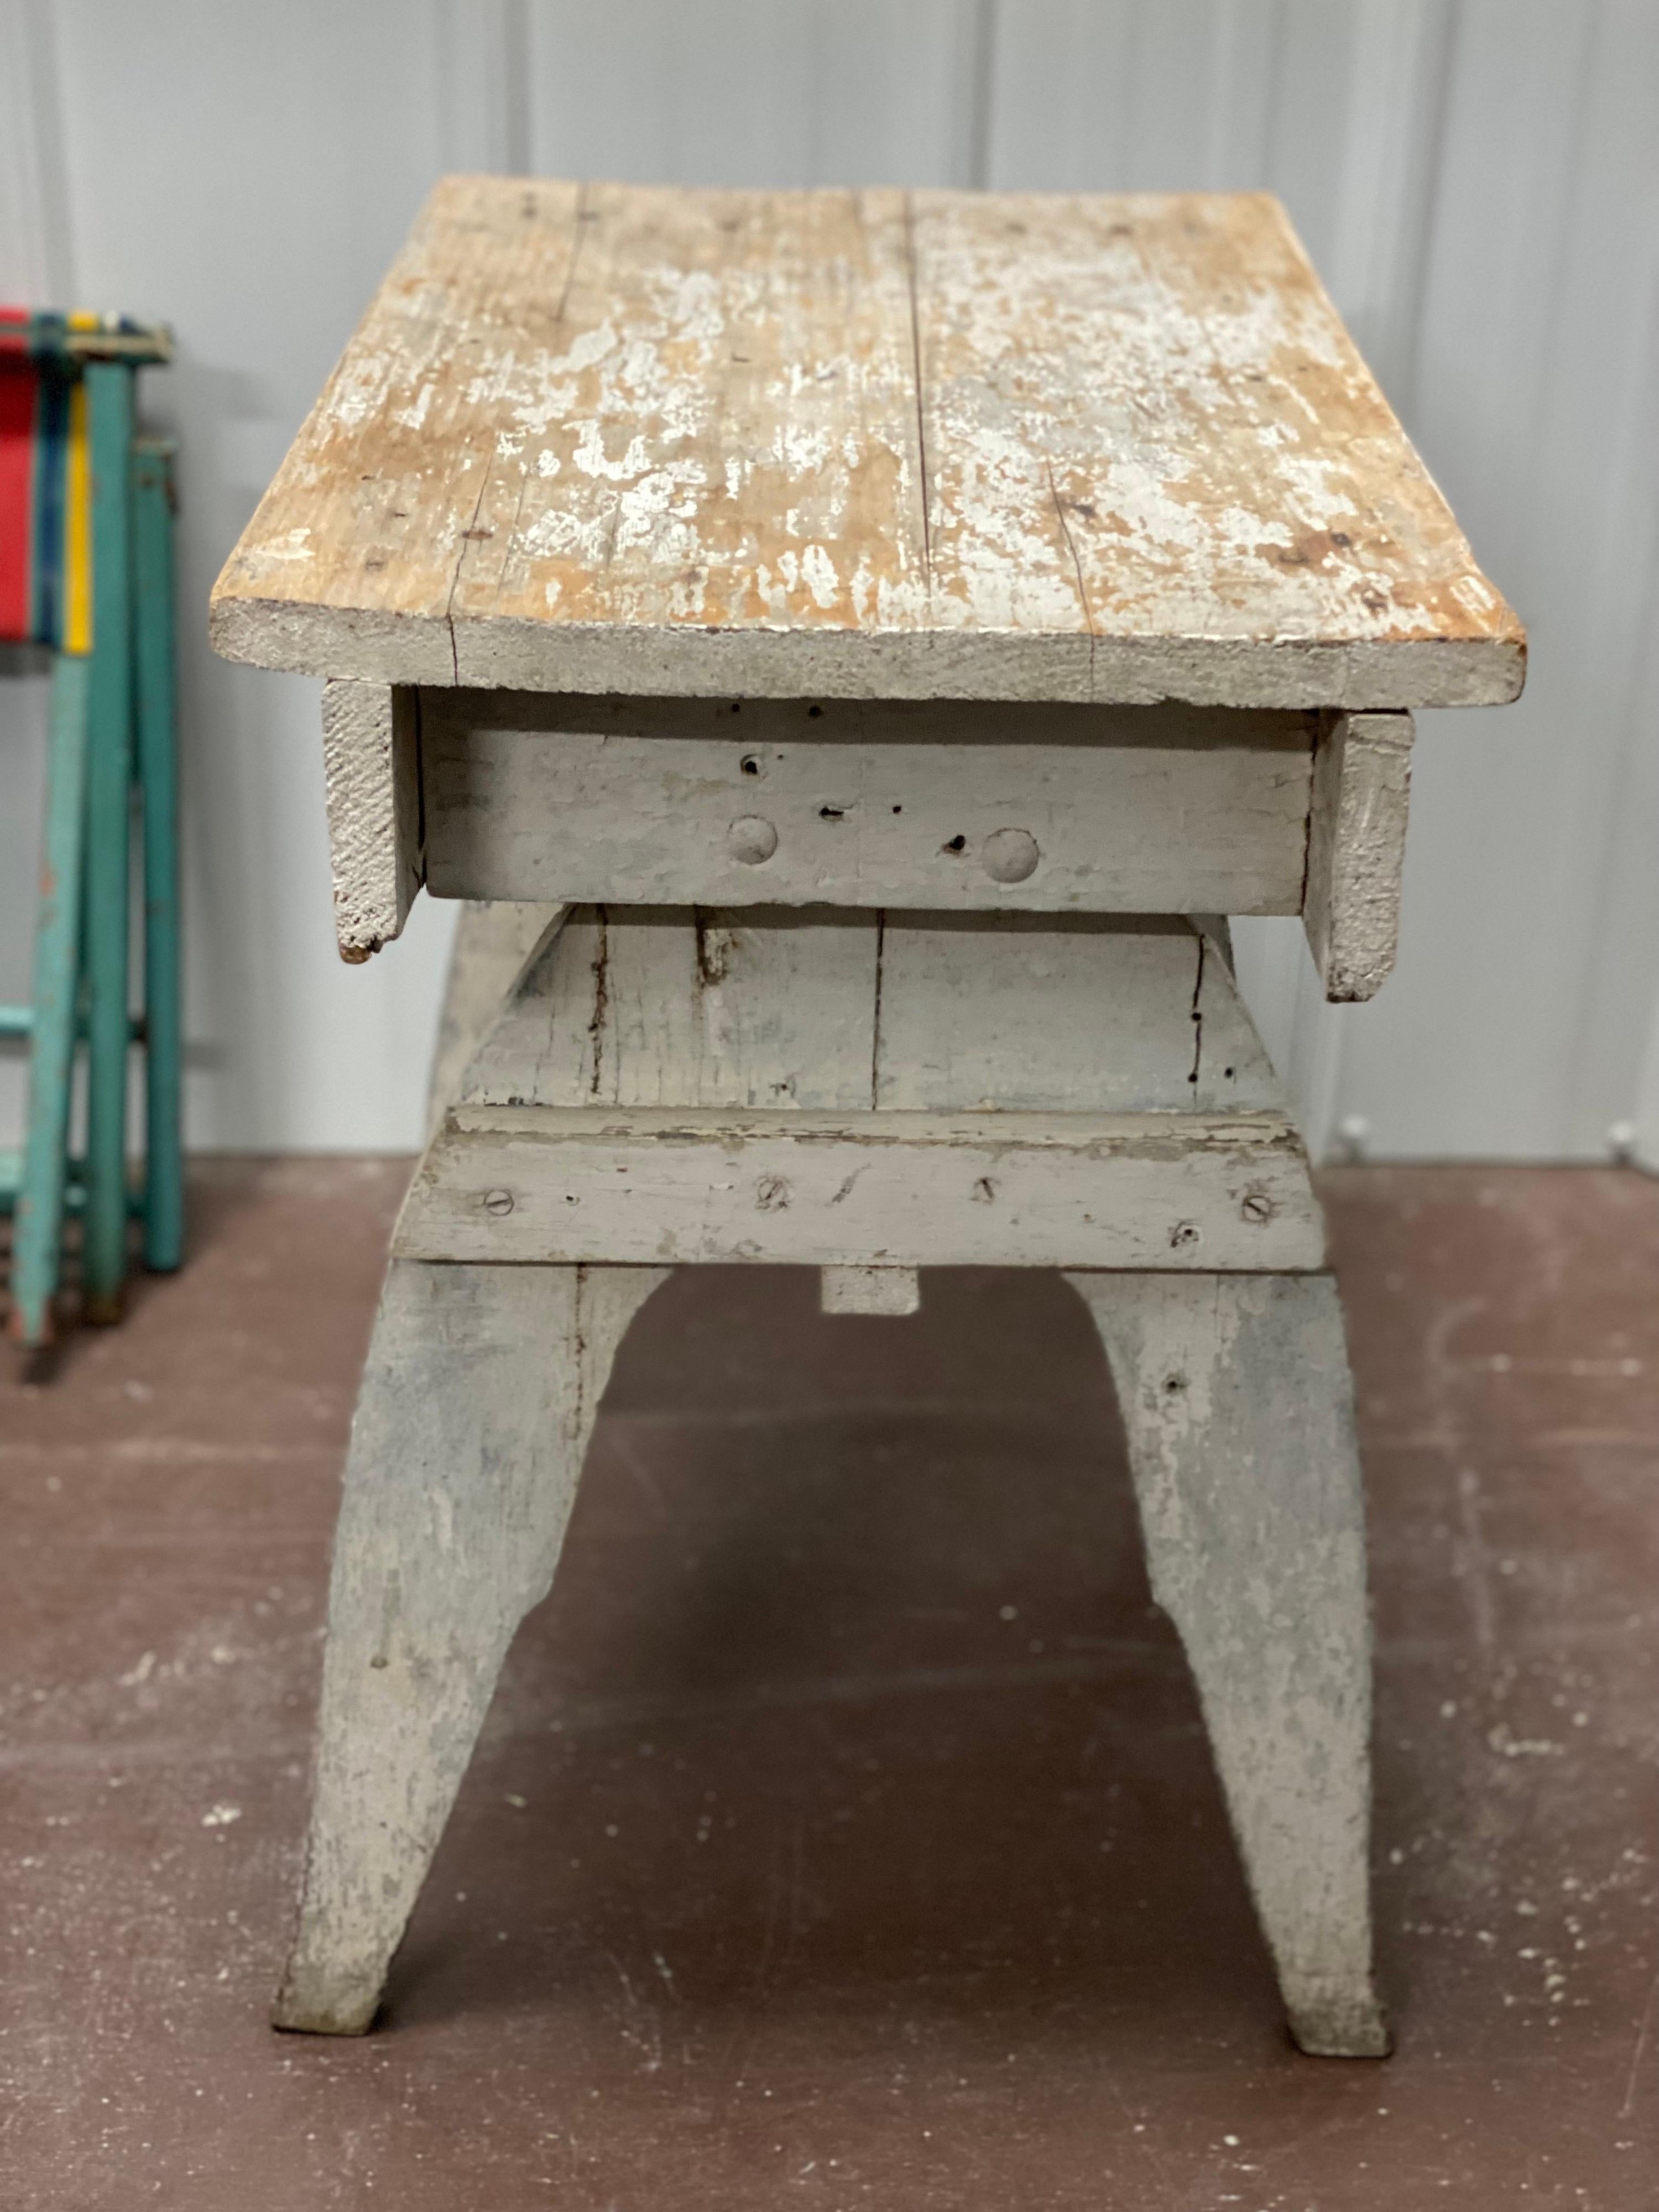 White painted rustic end table

Measure: 15 1/8” deep x 24” wide x 24 3/8” high.